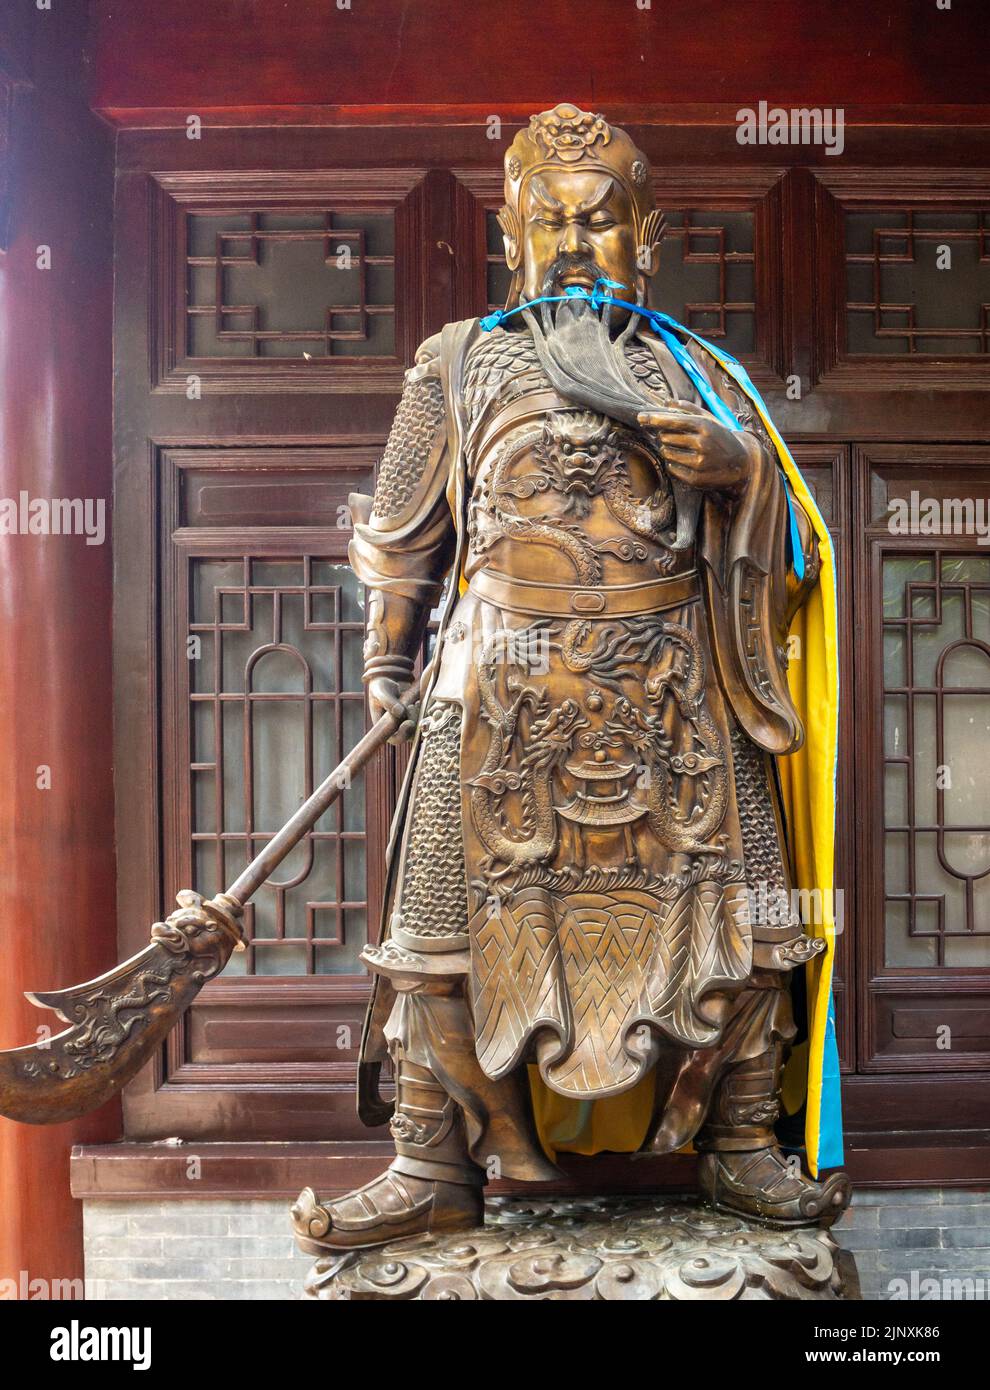 Old metallic religious sculpture or statue. The symbol of the Chinese culture is set outside a temple building. Stock Photo